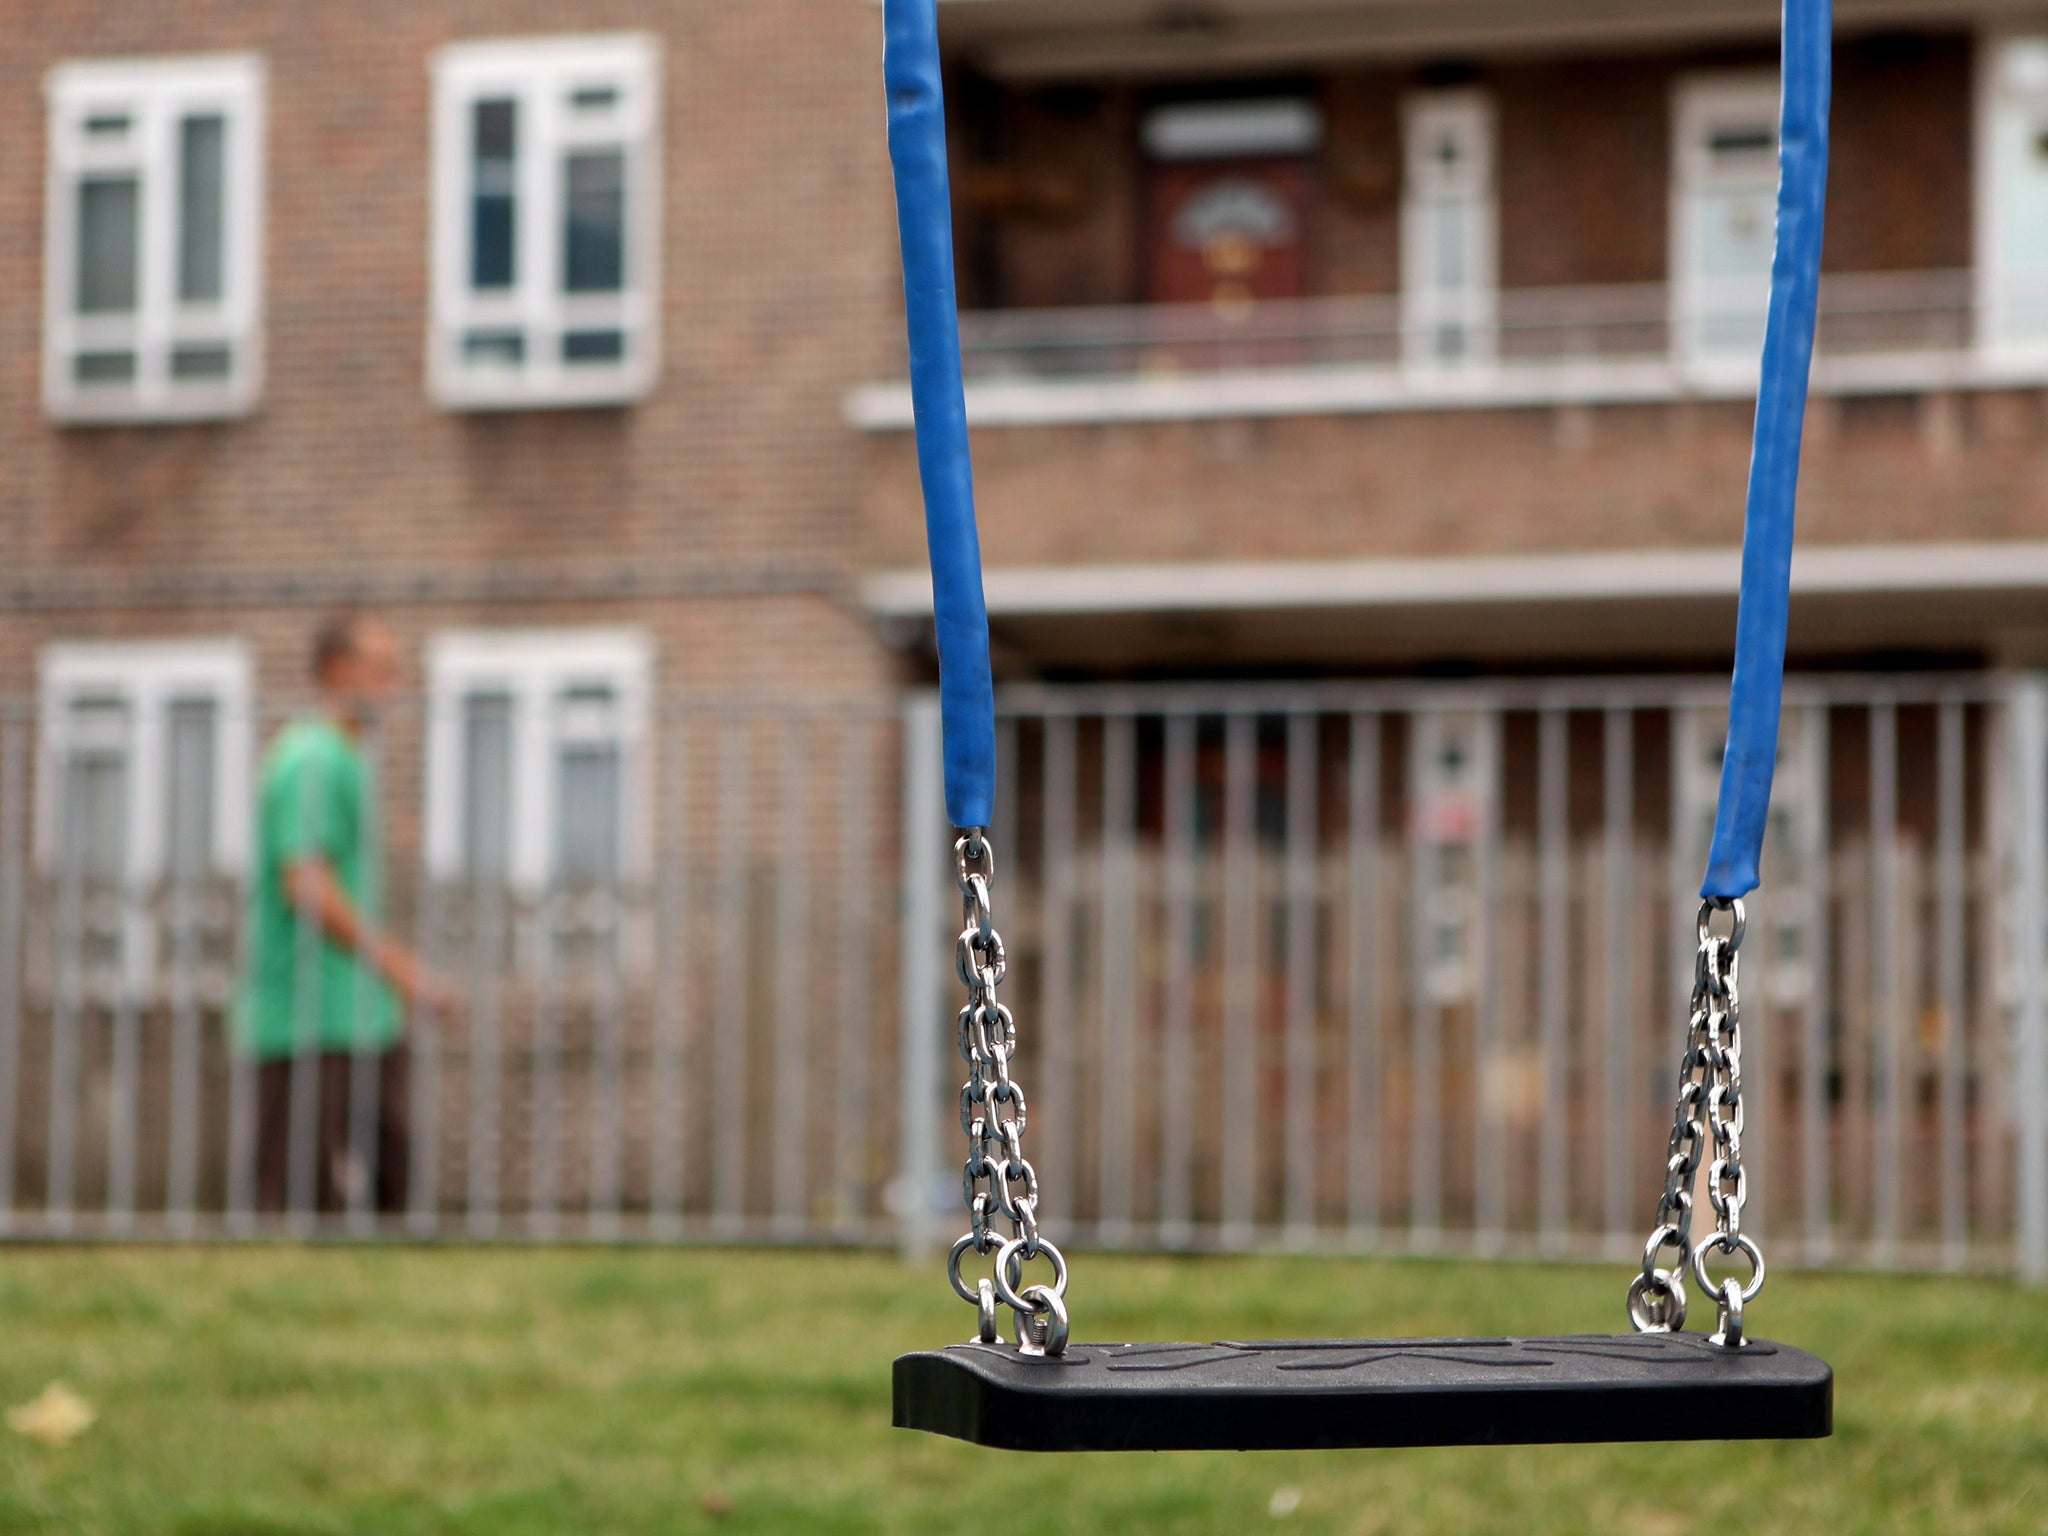 More and more young people are being forced to leave their communities, and not through choice